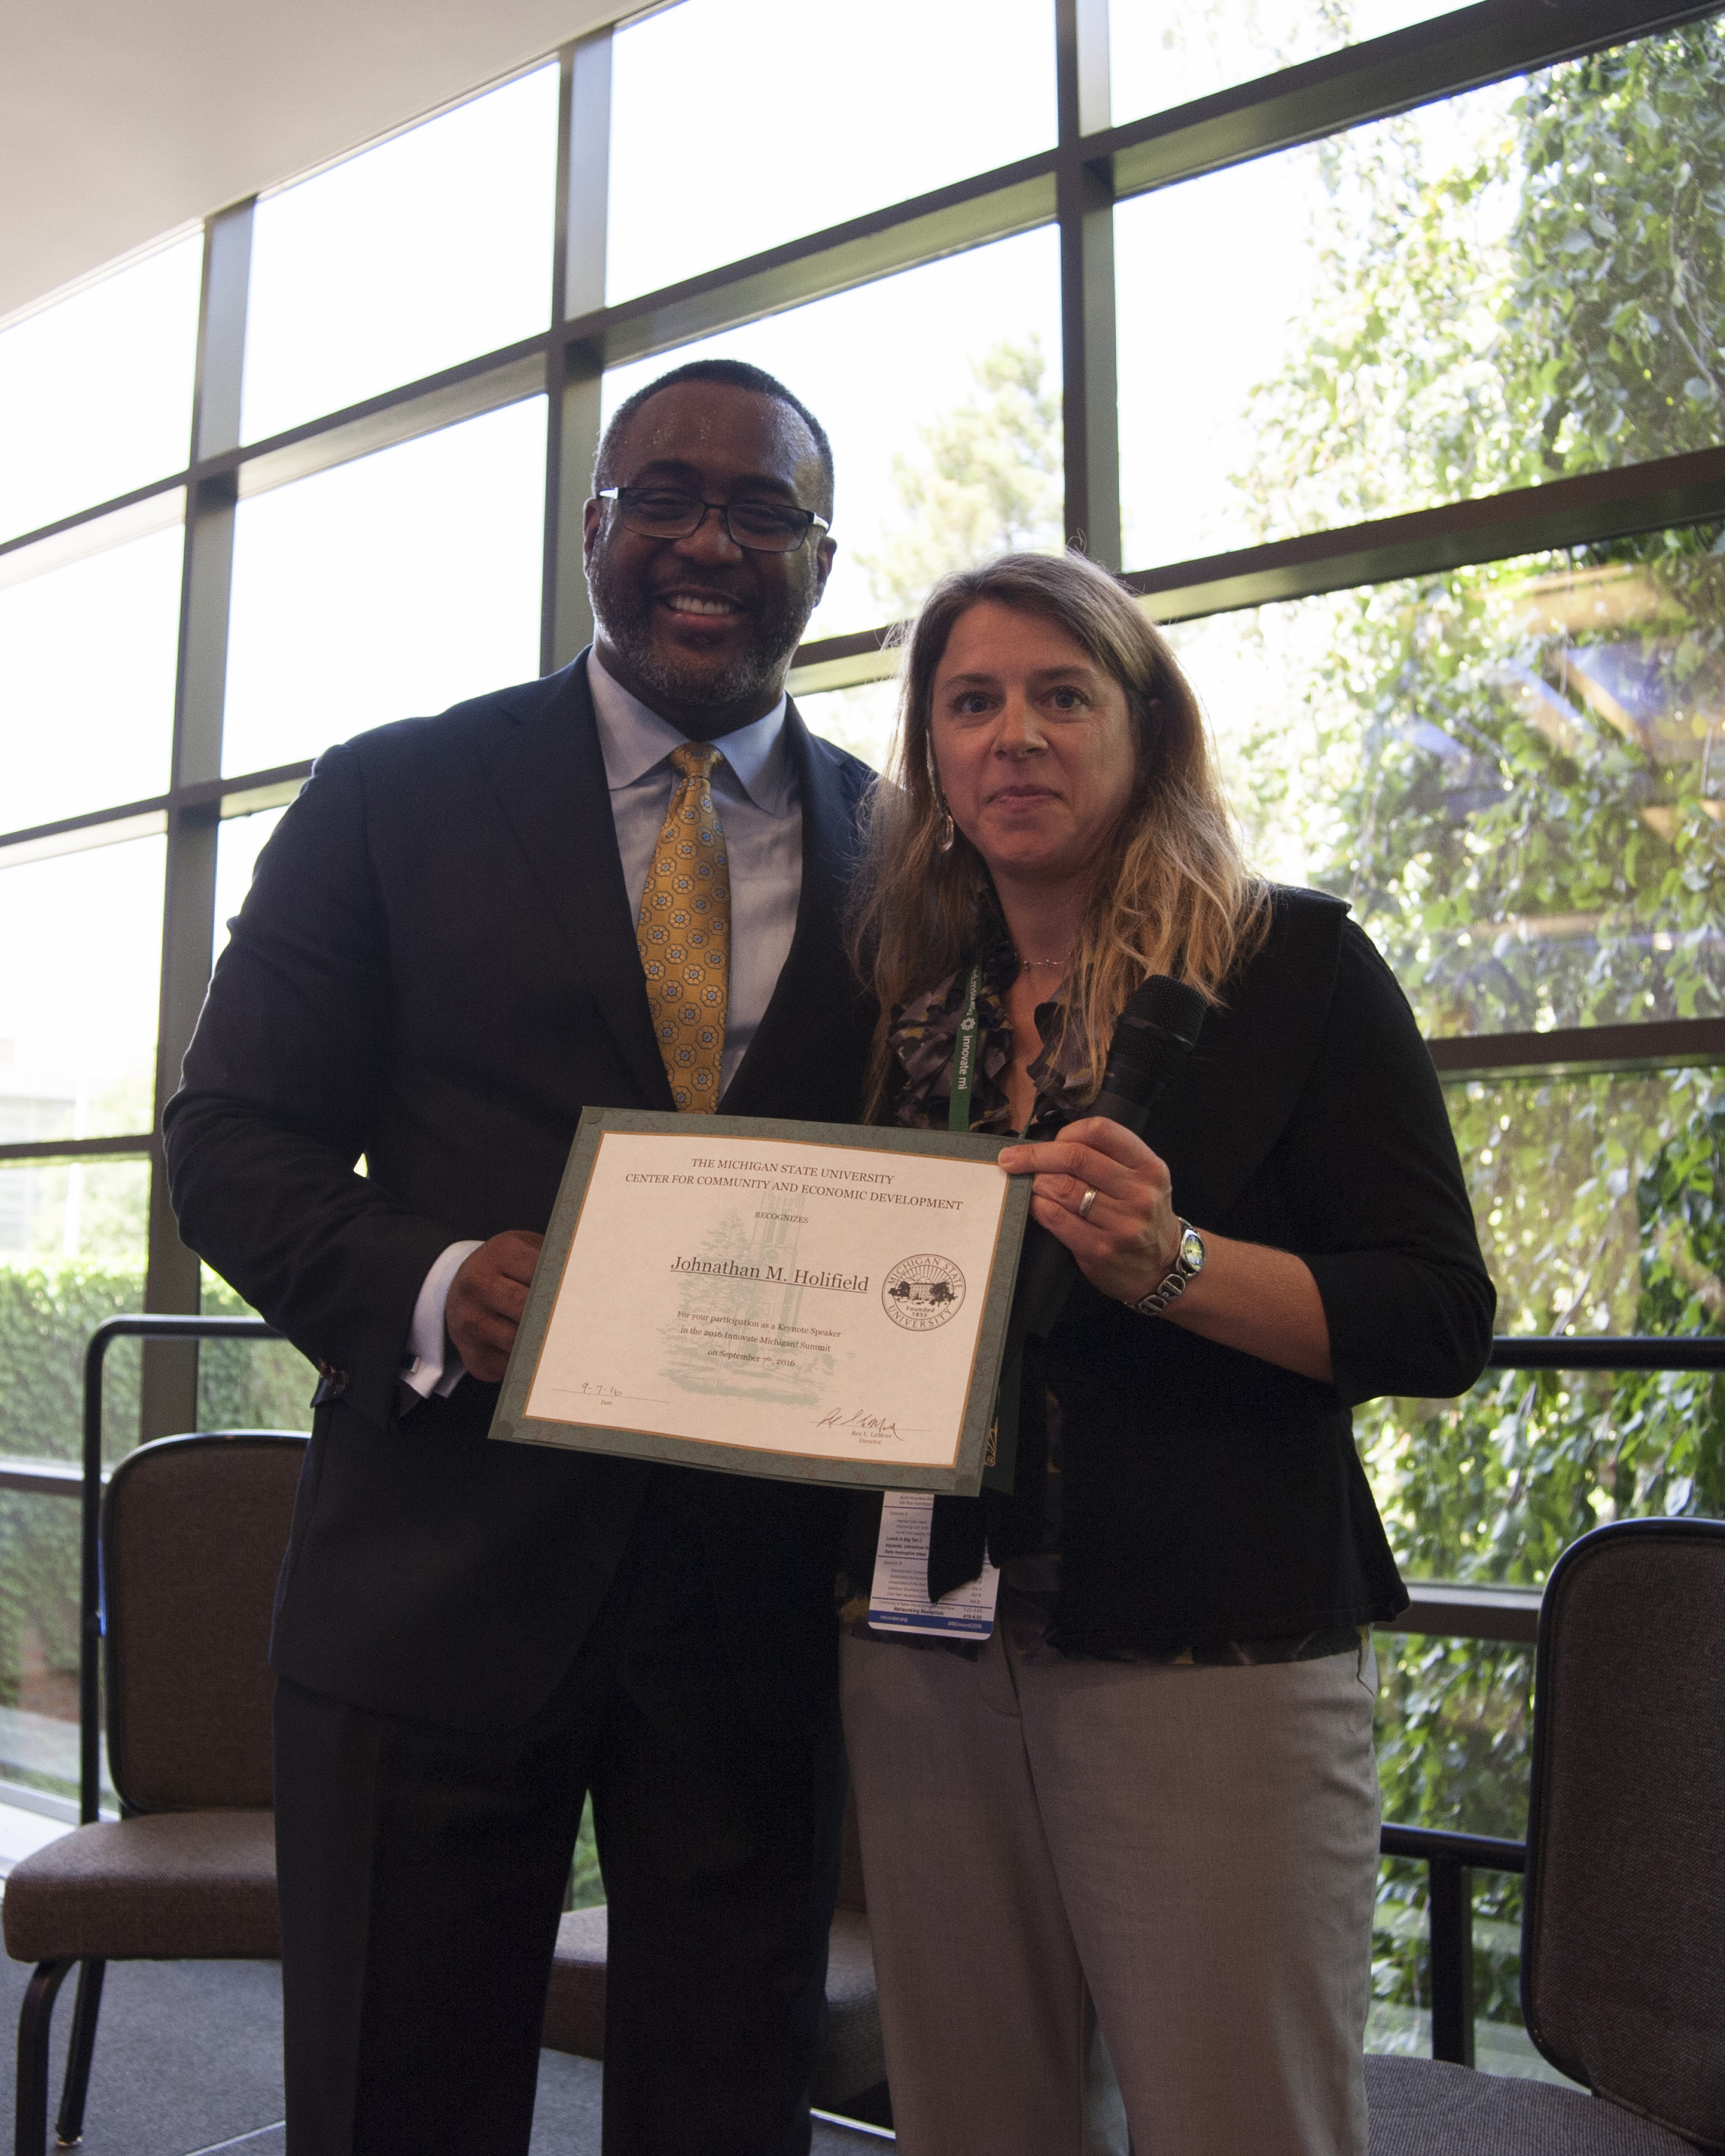 Jennifer Bruen presents Johnathan Holifield with a certificate for attending the Summit